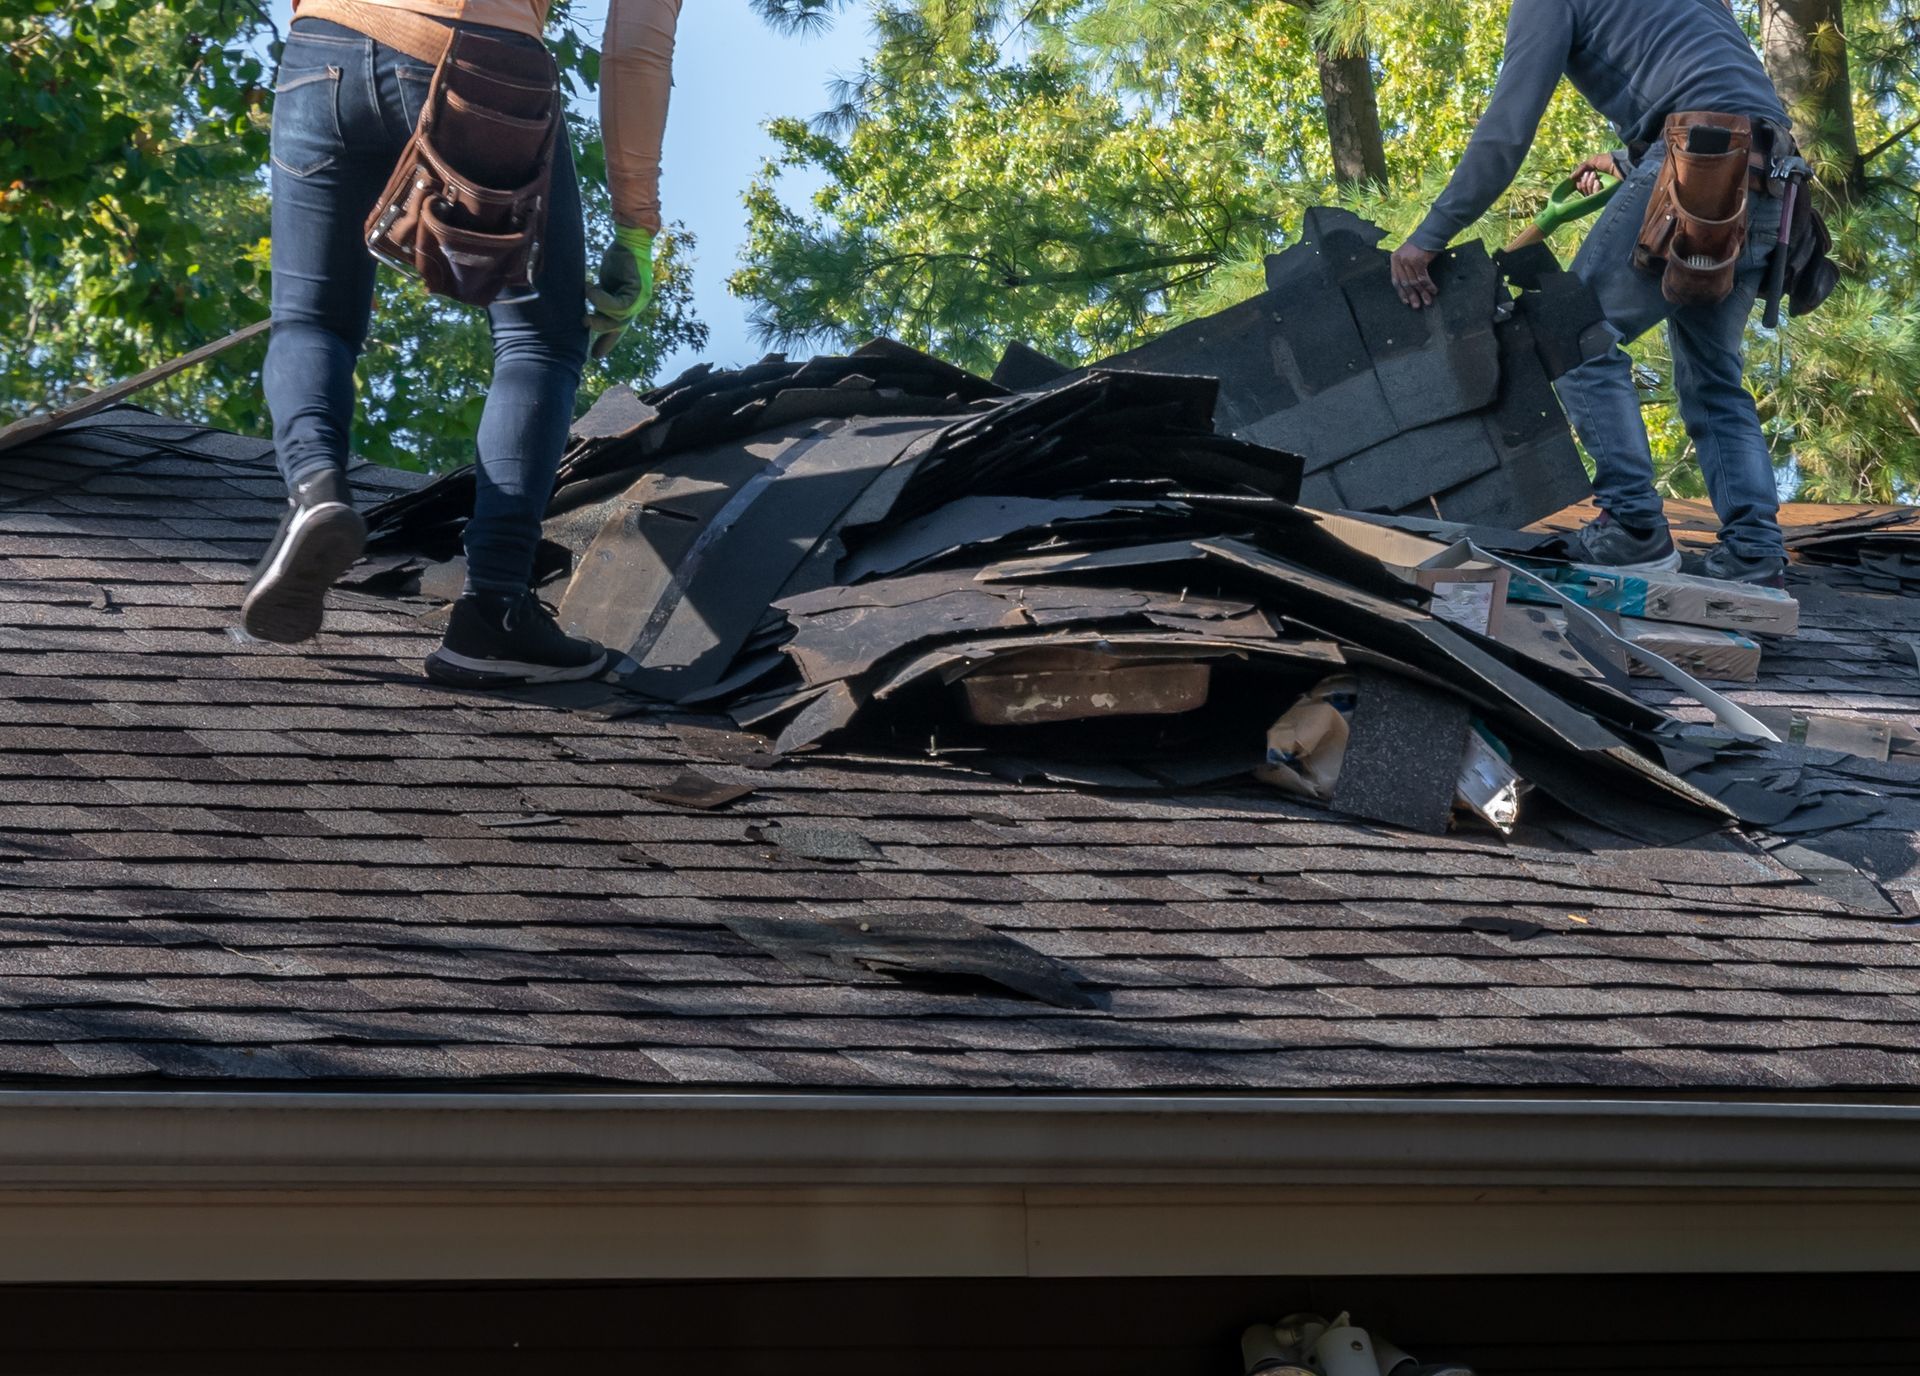 Roofers diligently removing old roofing material from a house, preparing for storm damage repair.